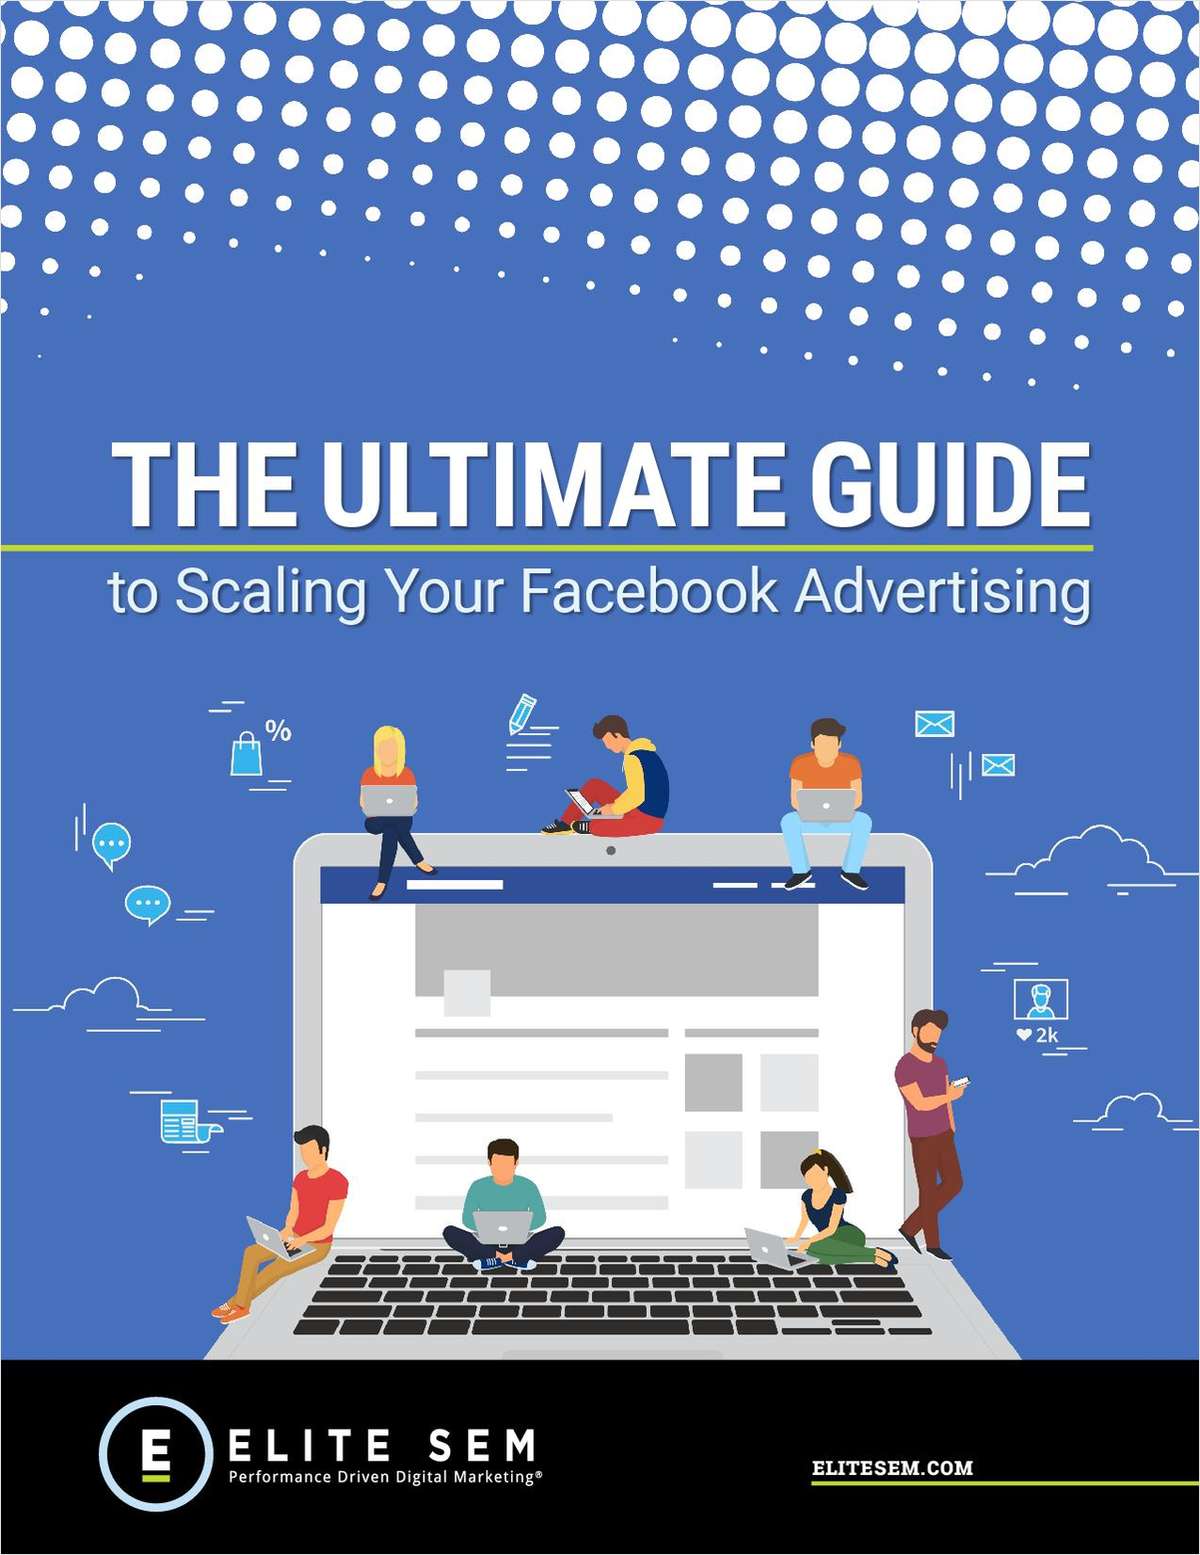 The Ultimate Guide to Scaling Your Facebook Advertising